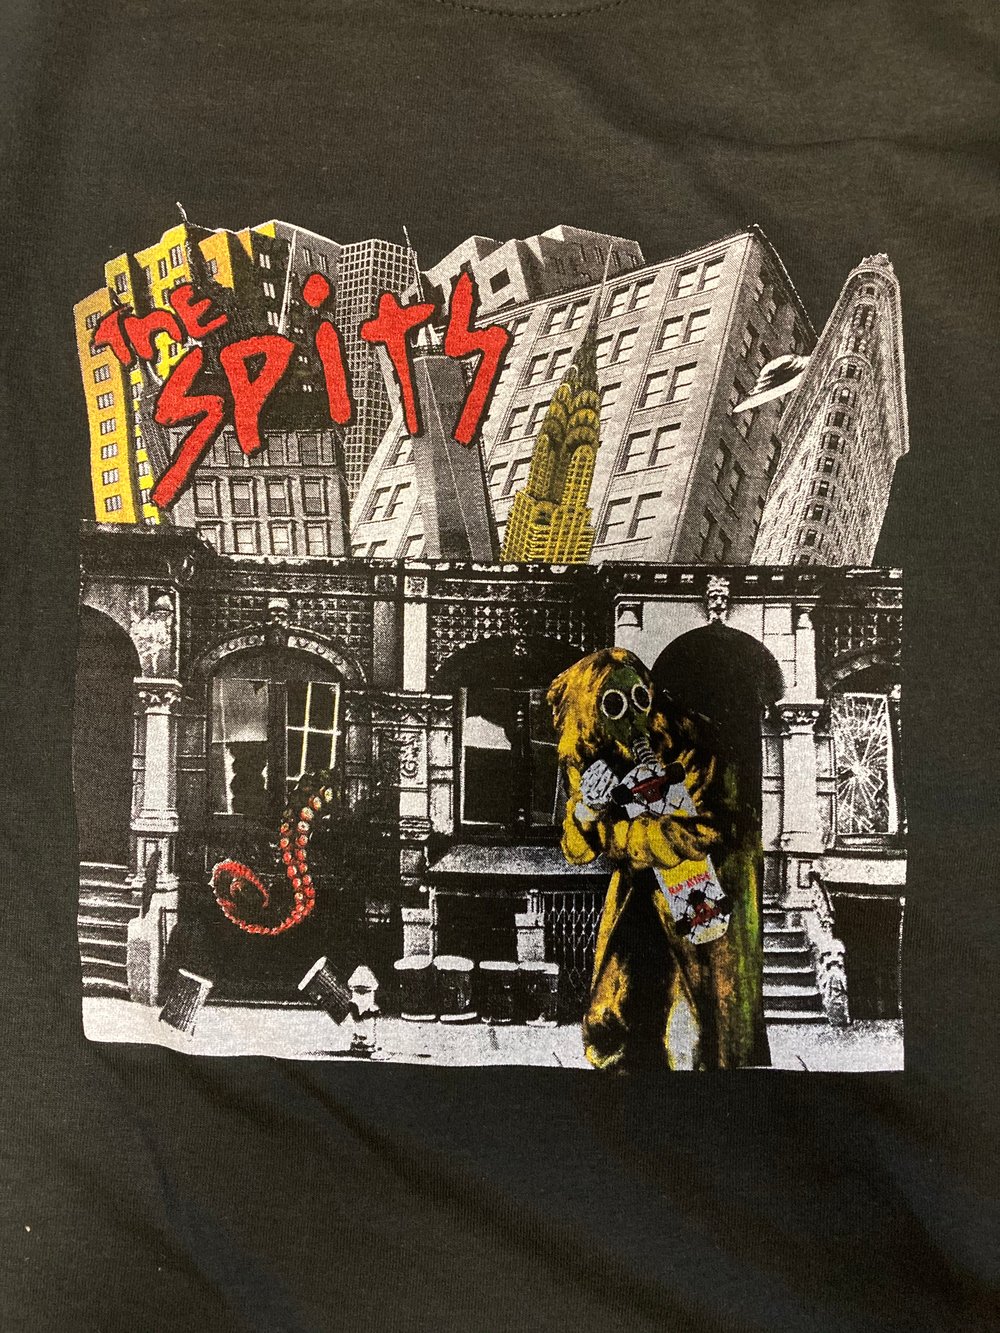 THE SPITS "UP ALL NGHT" 2 SIDED TOUR SHIRT, BLACK